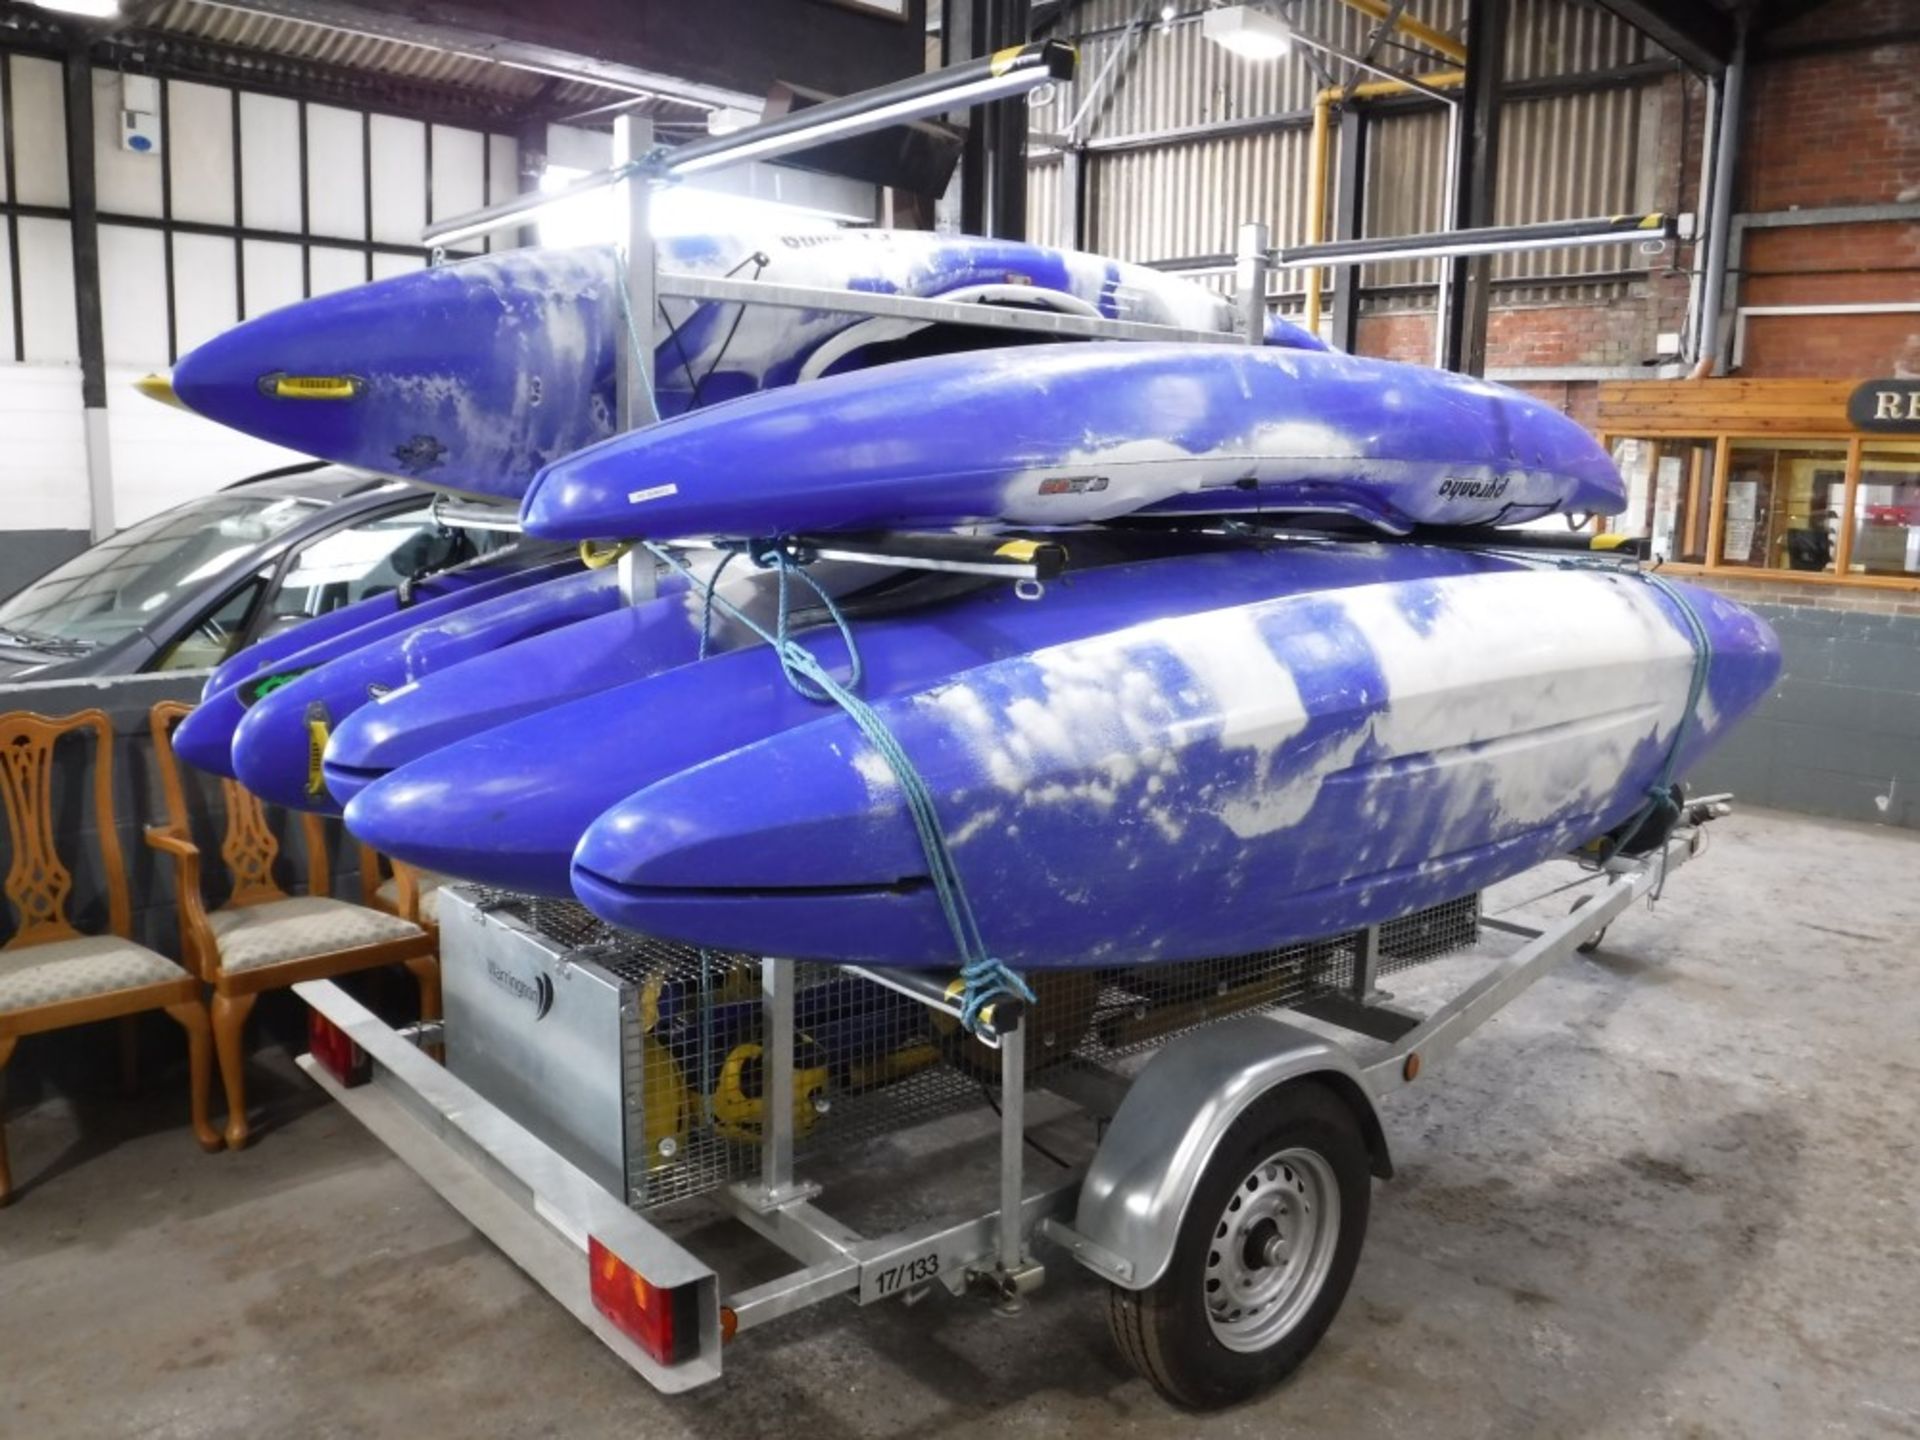 TRAILER C/W 9 KAYAKS / CANOES (DIRECT COUNCIL) [+ VAT] - Image 2 of 2